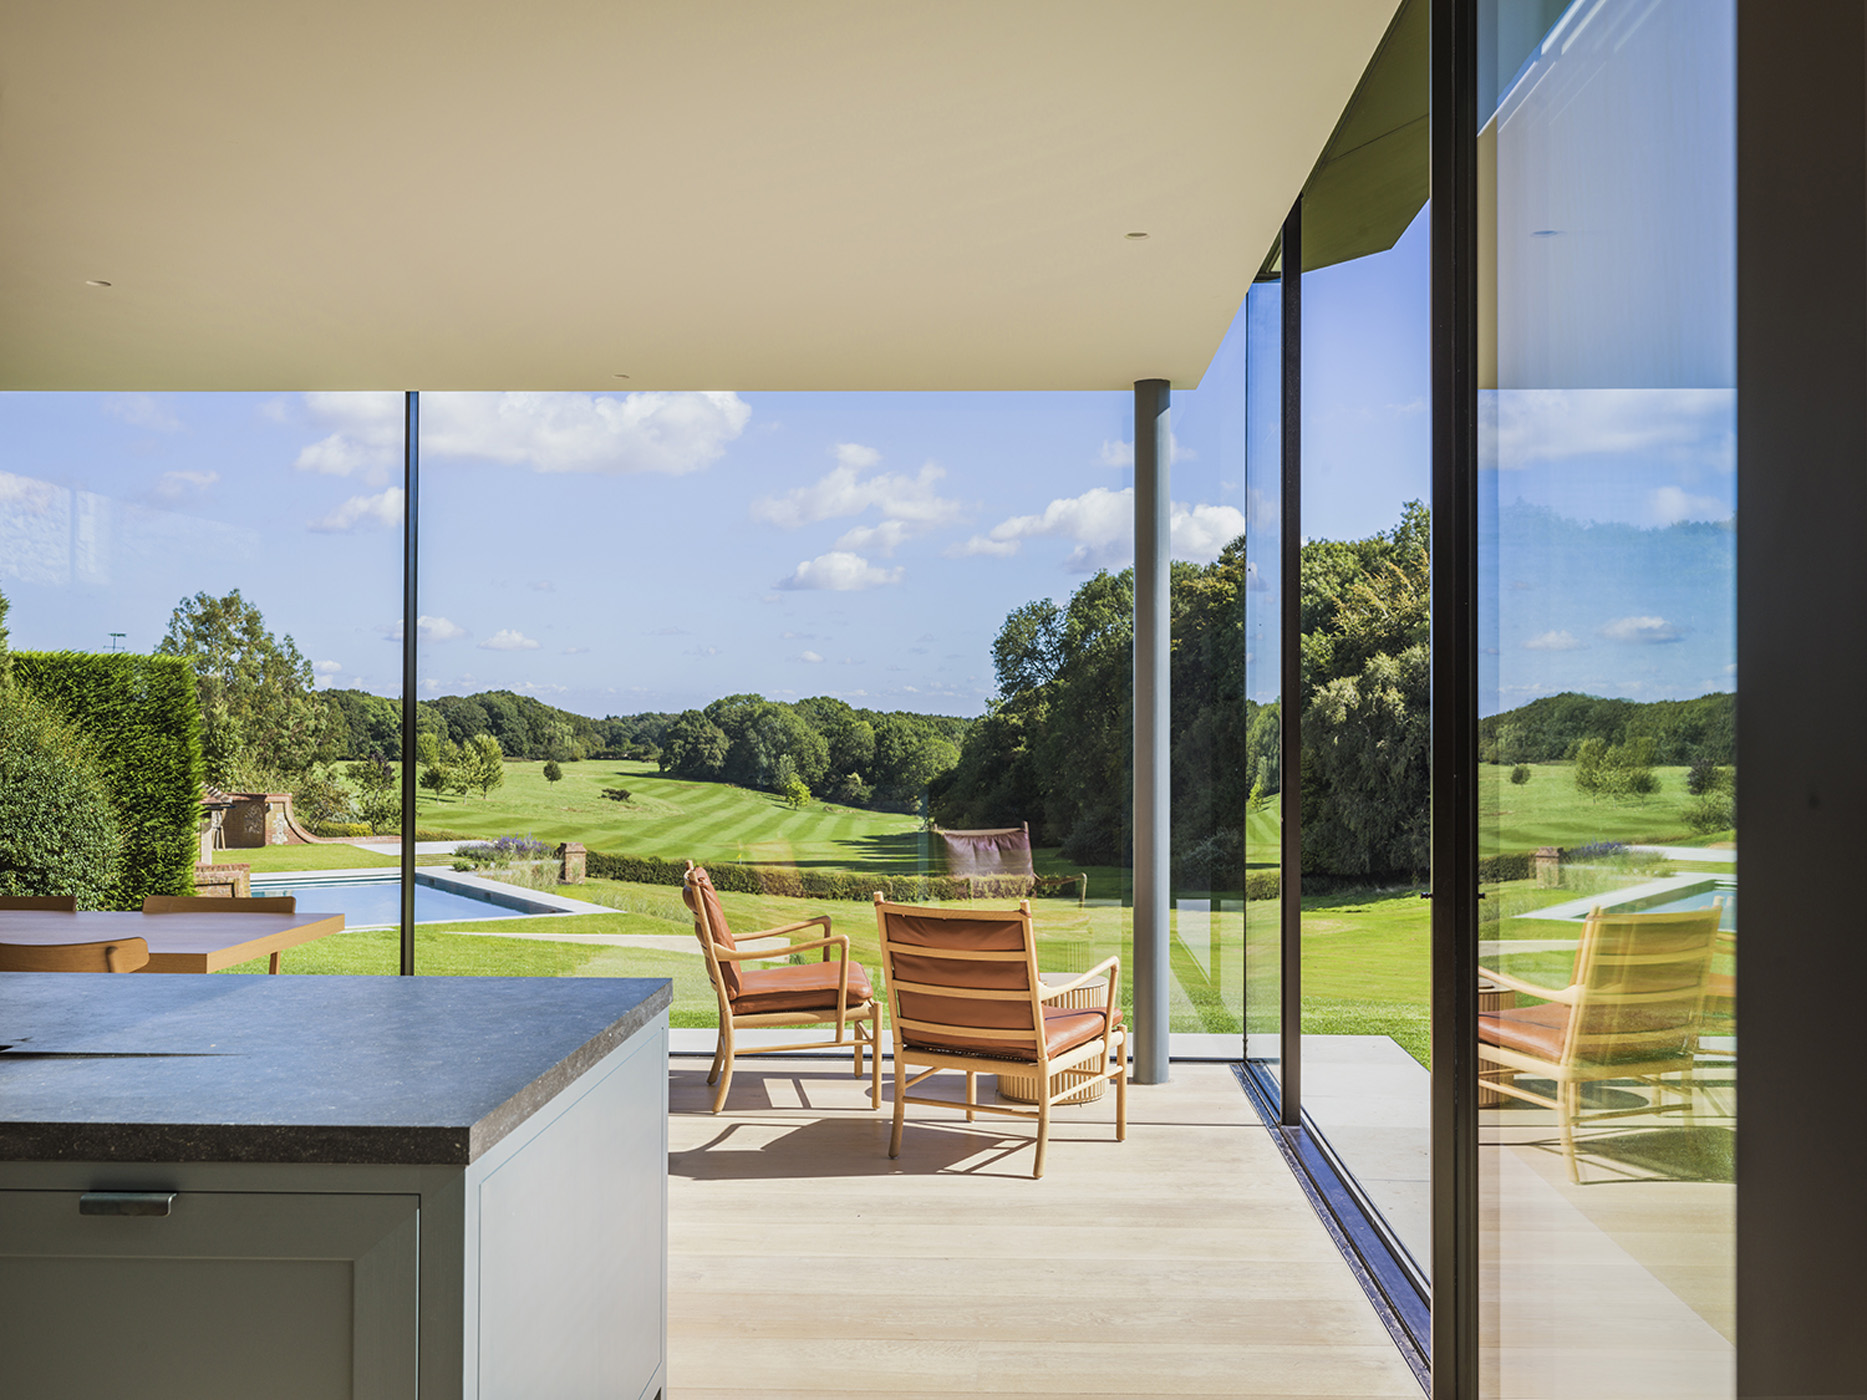 A modern glass extension provides views of landscaped grounds